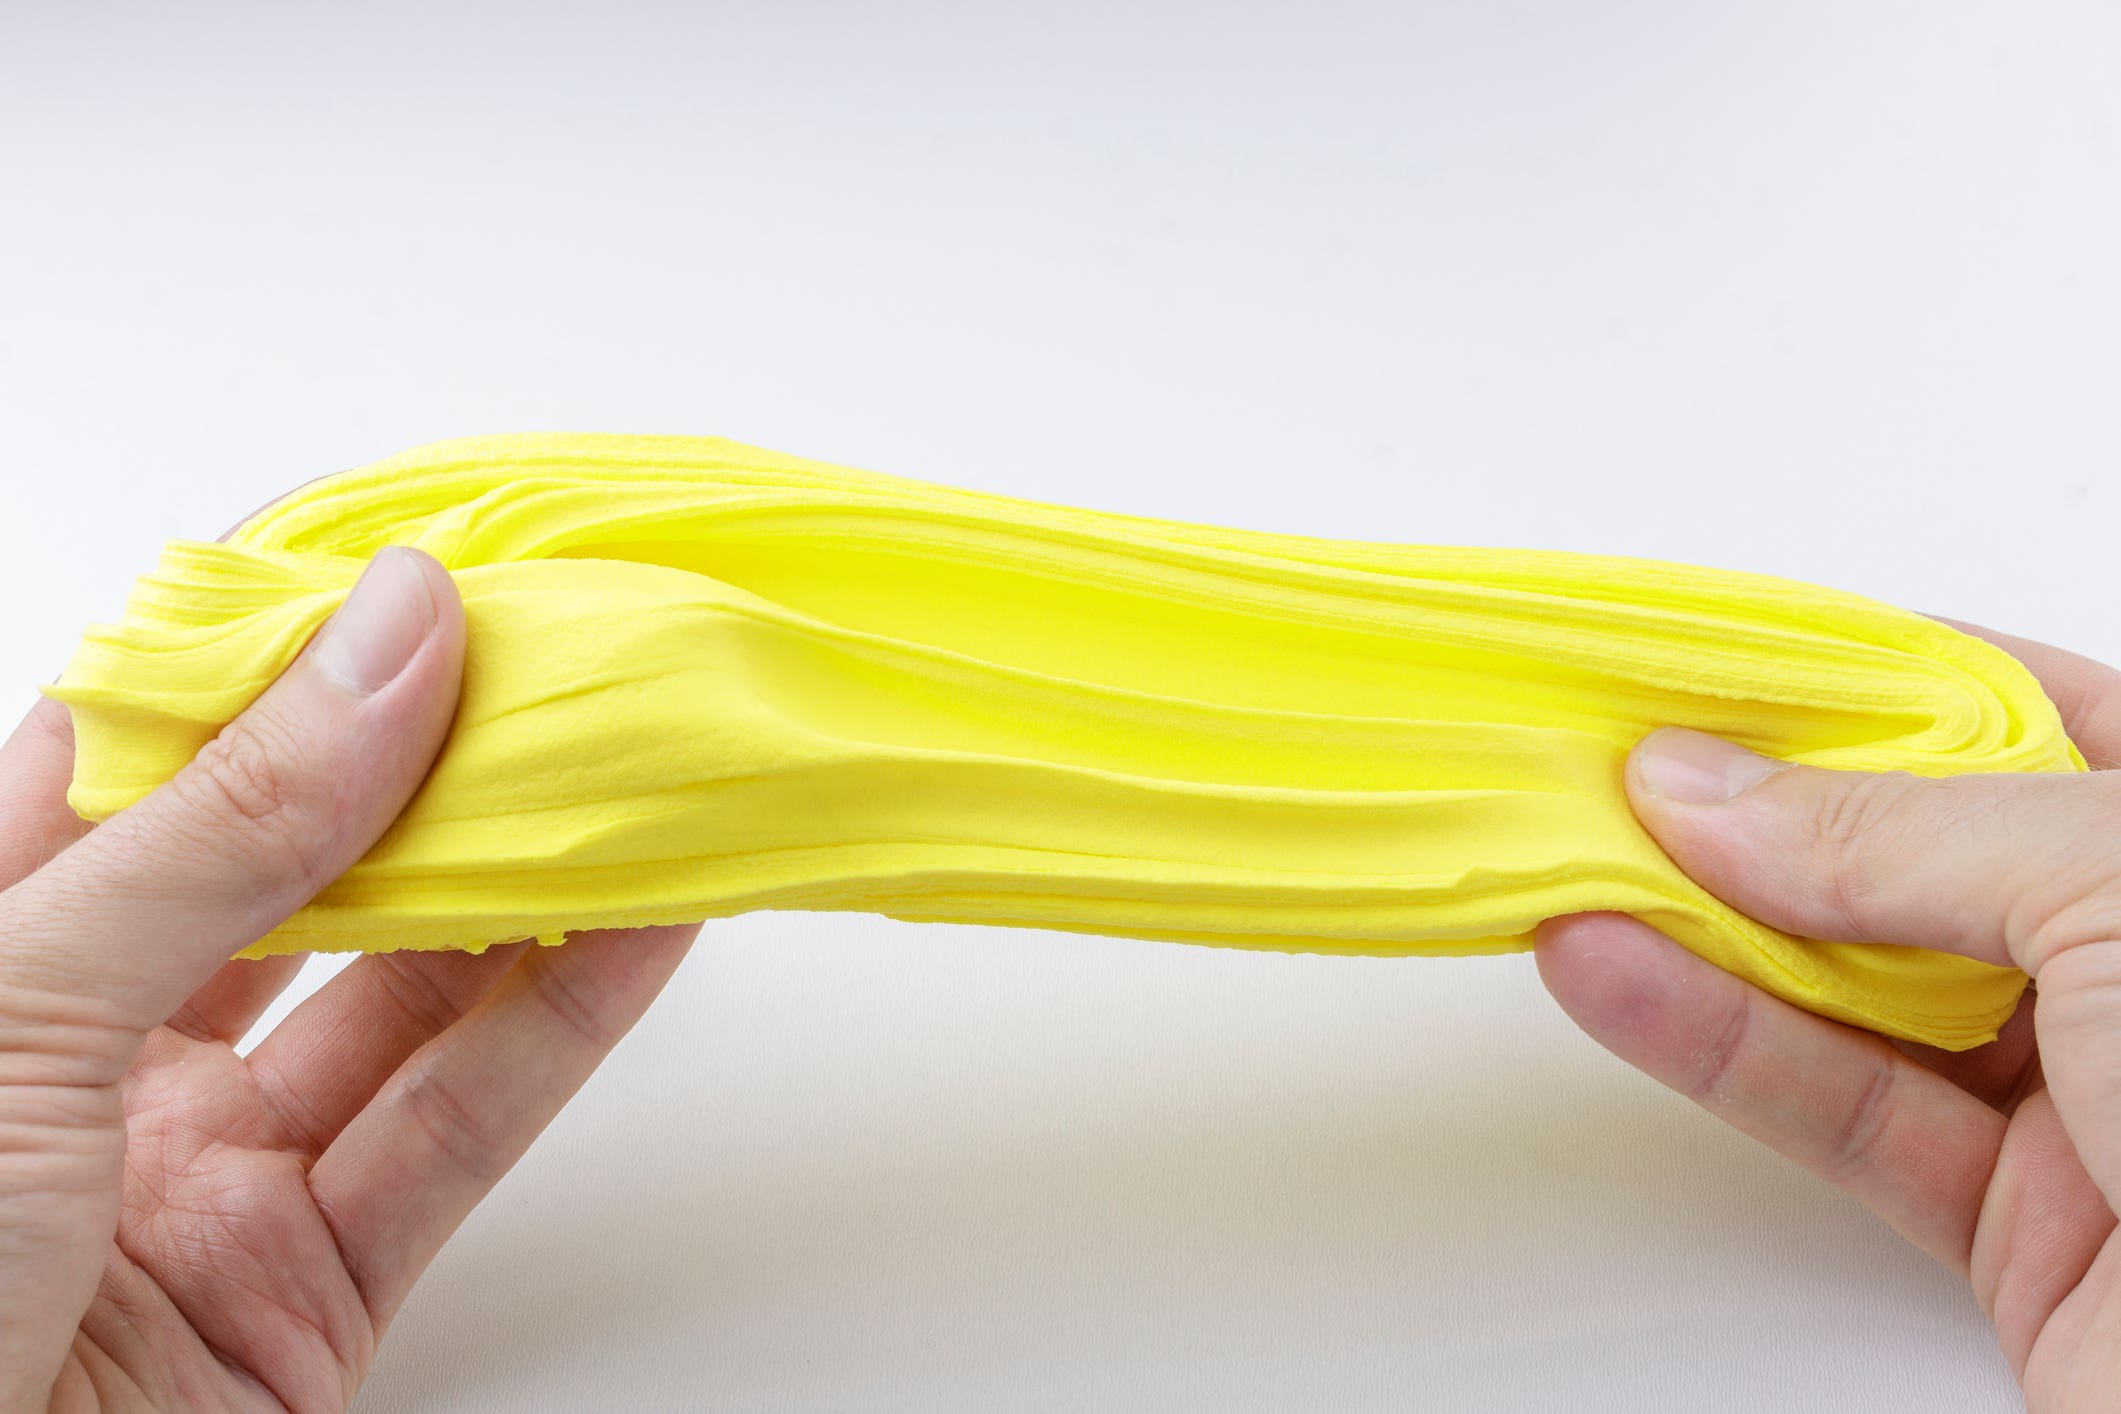 Hands stretching yellow silly putty